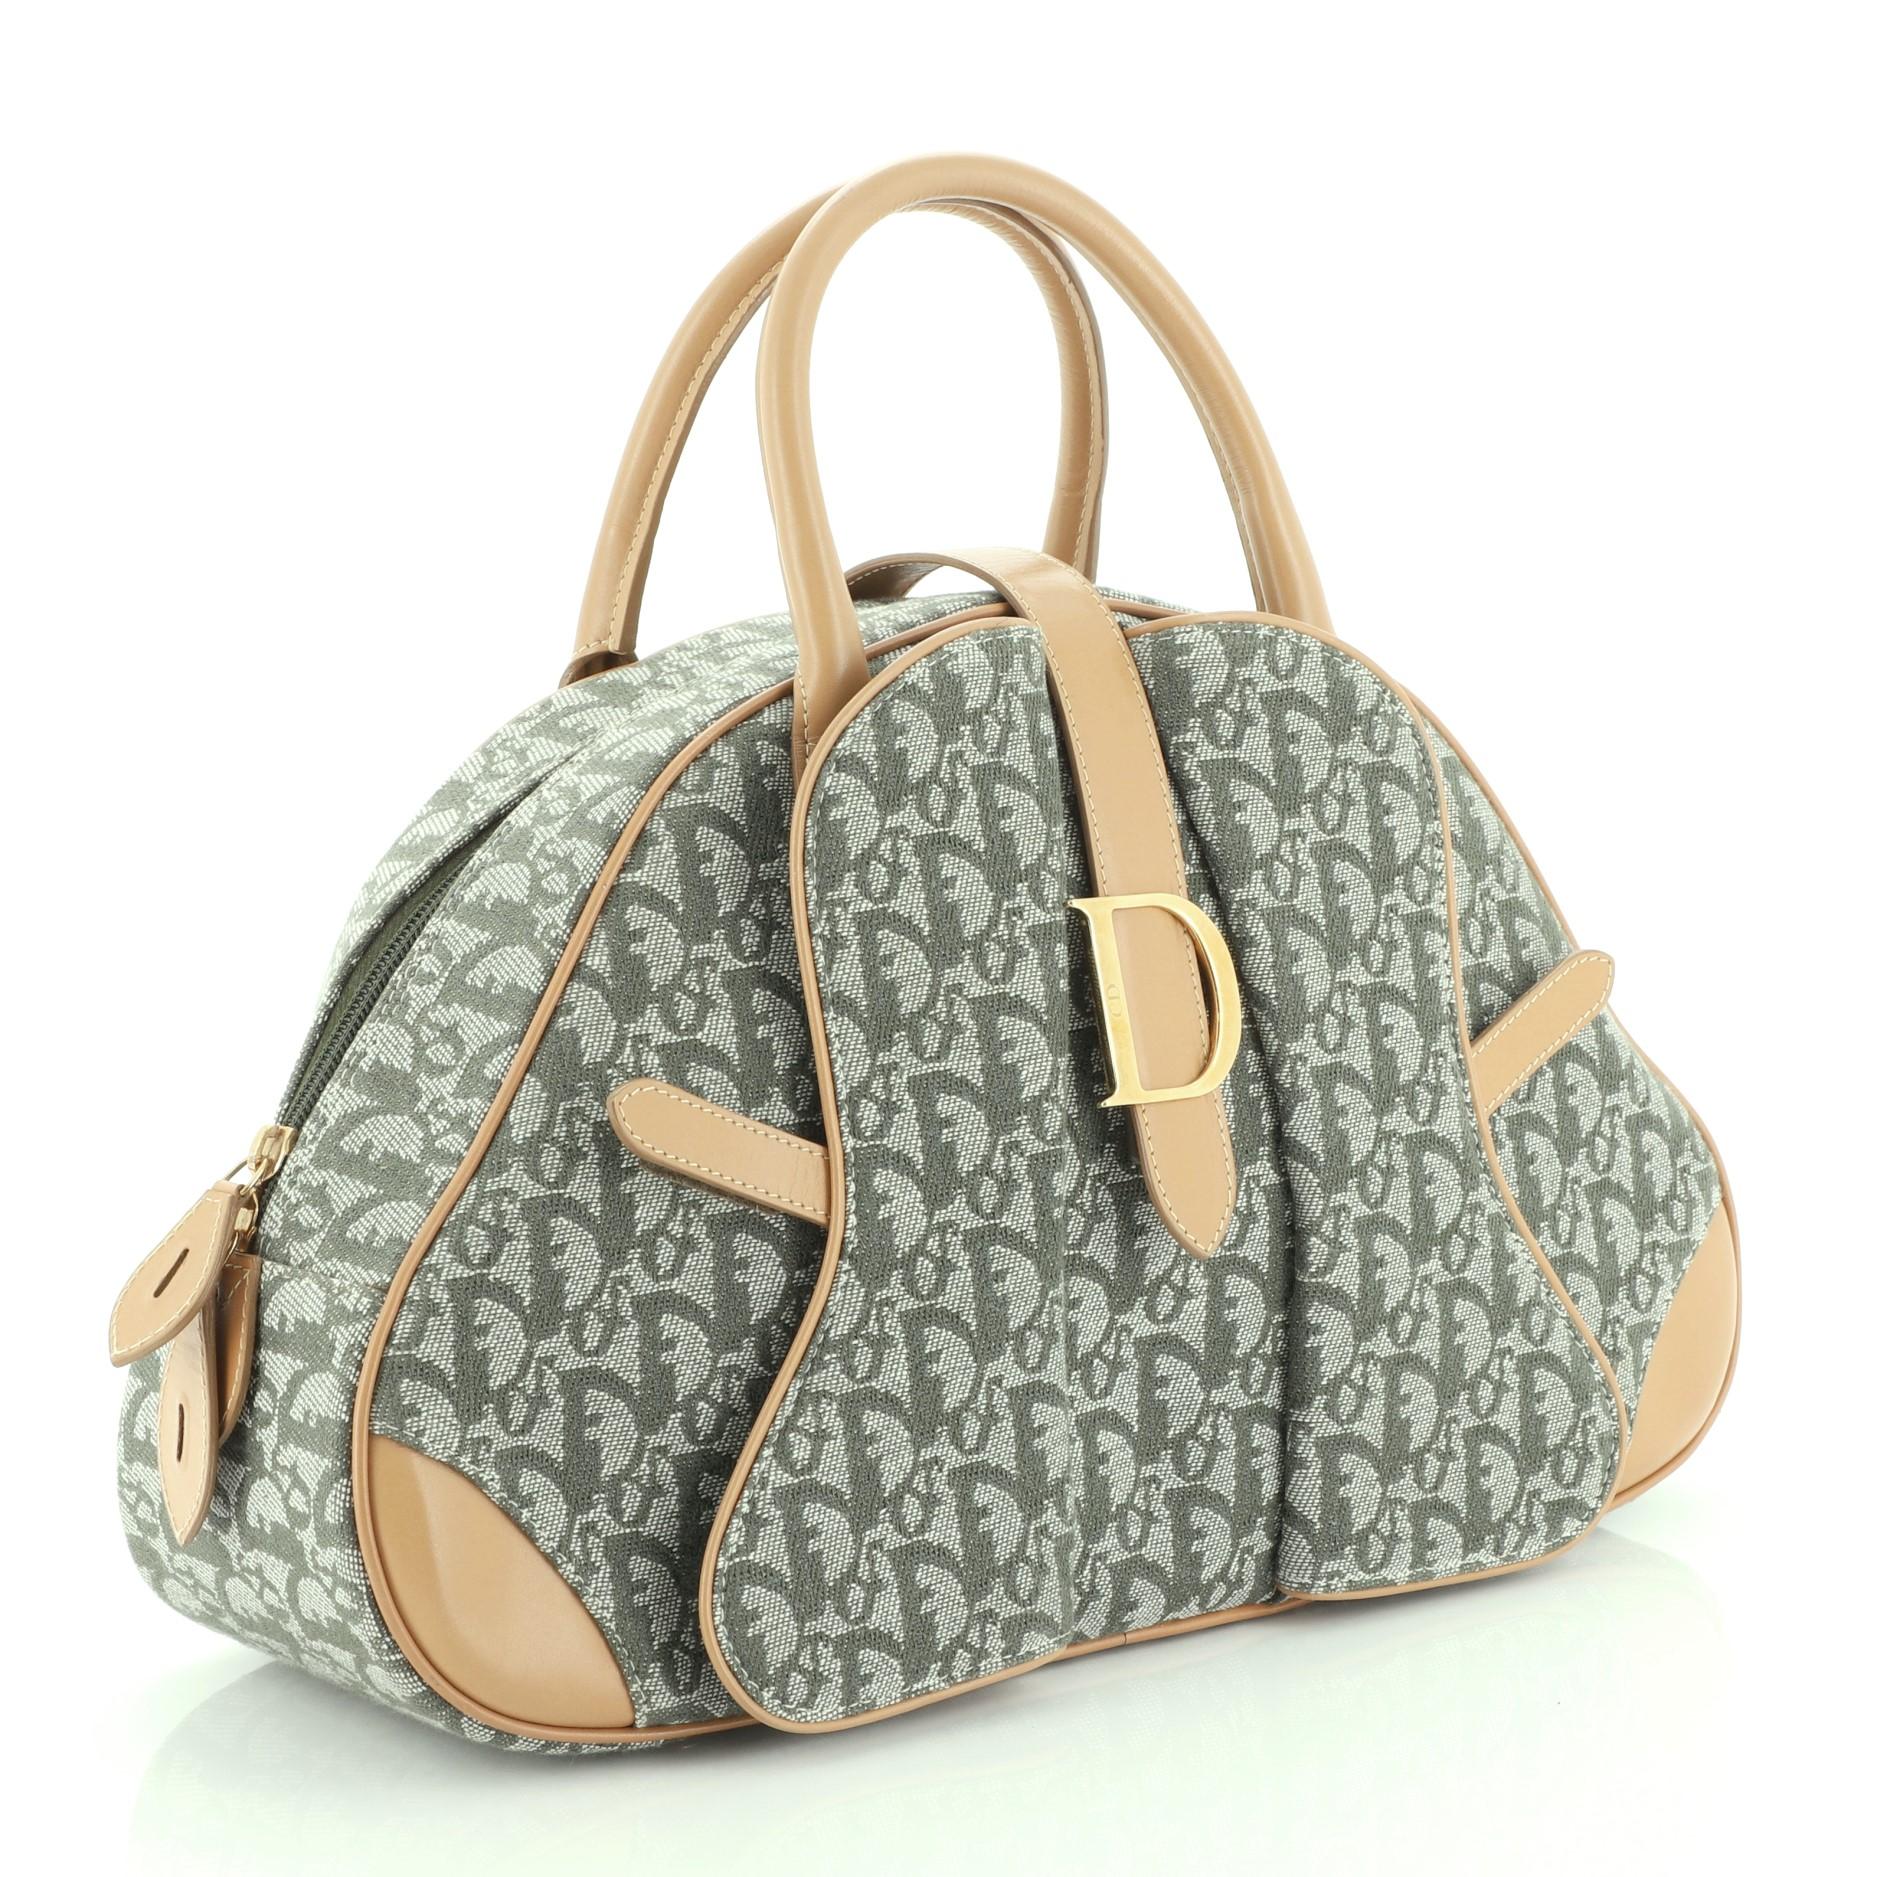 This Christian Dior Saddle Bowler Bag Diorissimo Canvas Medium, crafted from green diorissimo canvas, features dual rolled leather handles, cross-over strap with Dior clasp, and gold-tone hardware. Its zip closure opens to a green nylon interior.